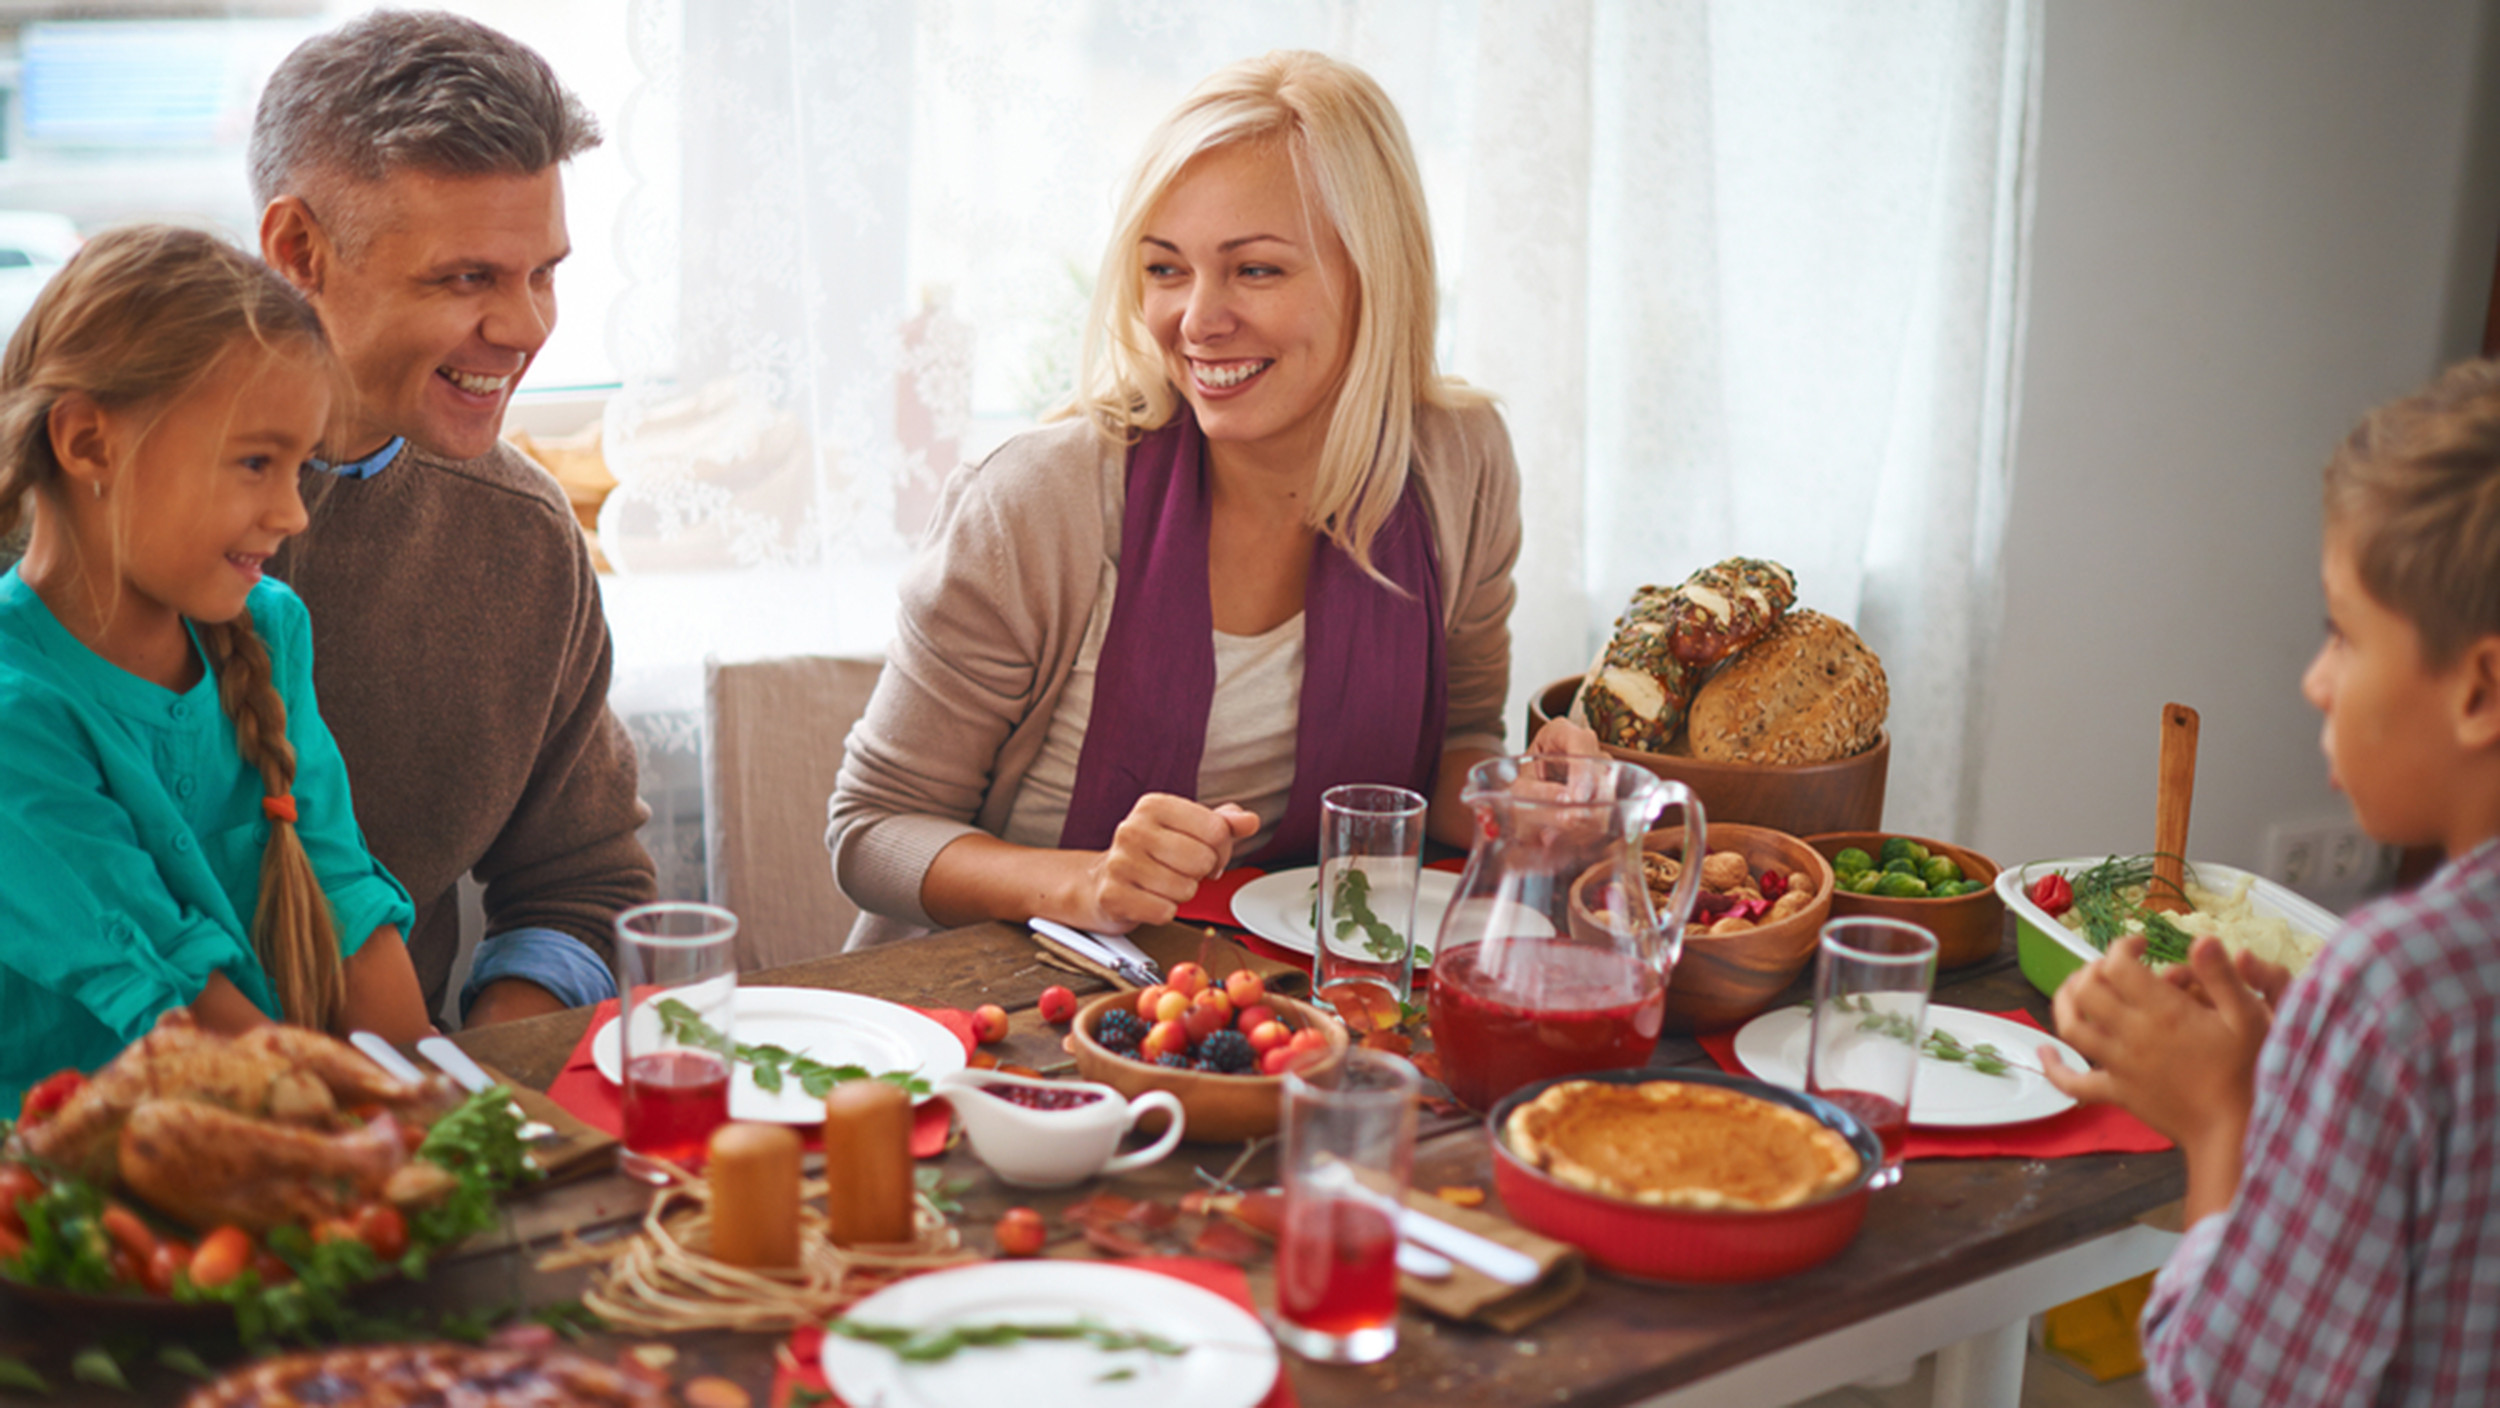 Thanksgiving Dinner Delivery Hot
 Your guide to planning Thanksgiving dinner TODAY